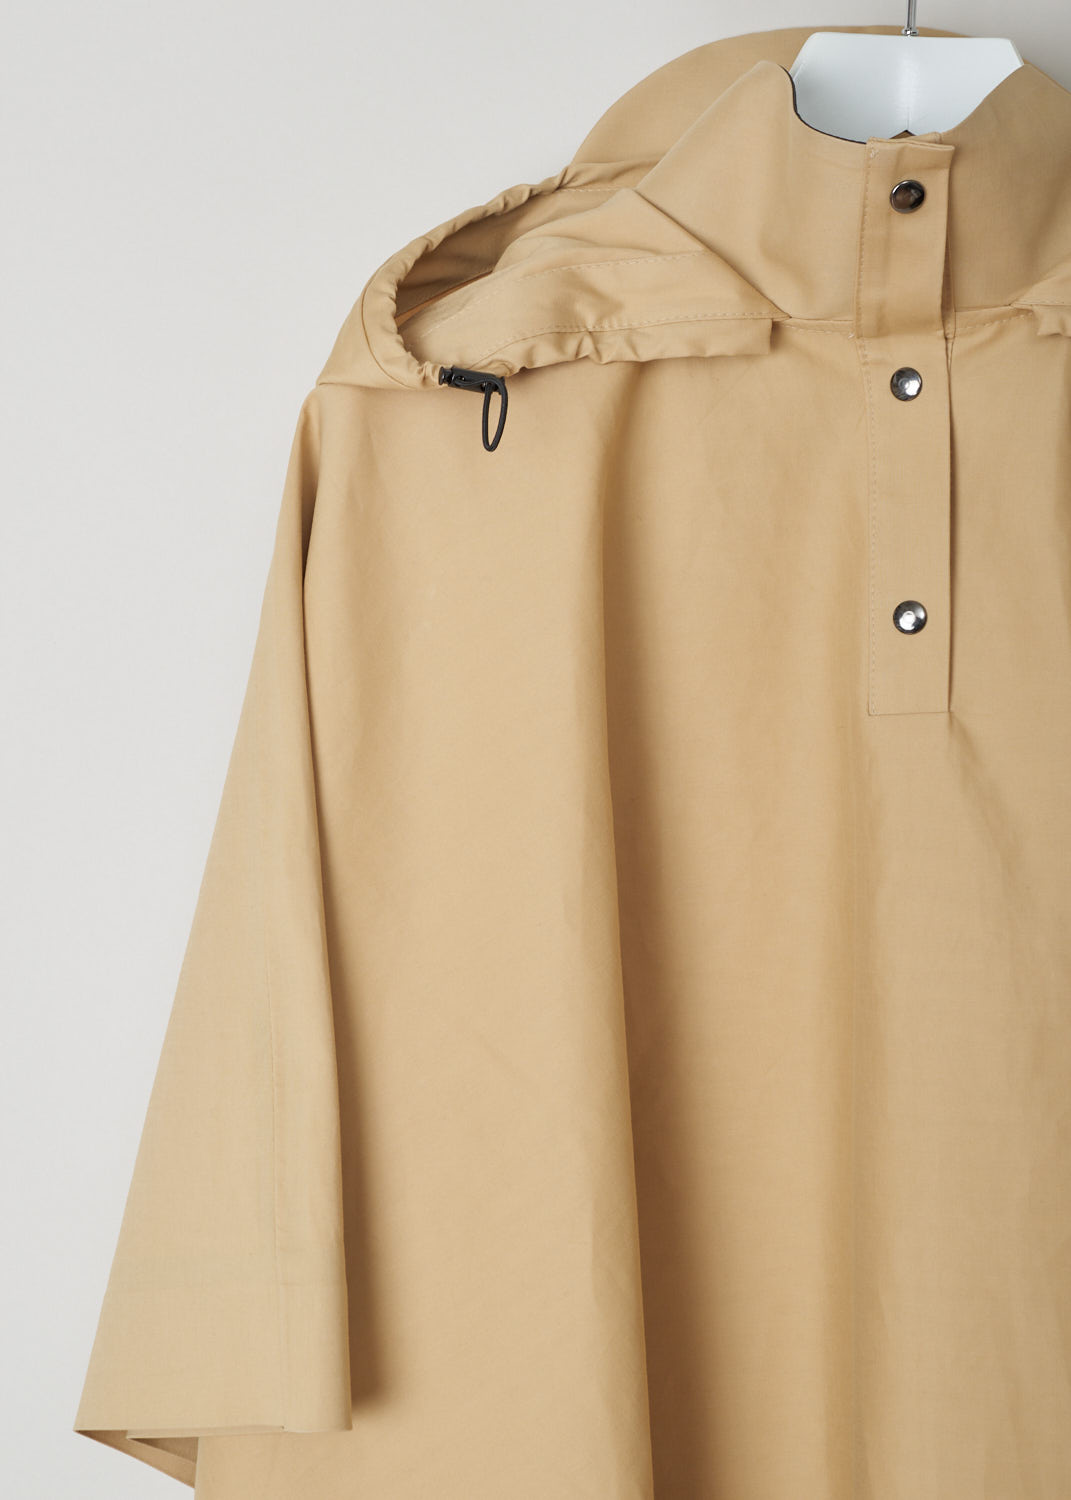 Kassl, Beige trench poncho, poncho_beige_HS21C164070003W, beige, detail, Made from a lightweight cotton-blend canvas, featuring a large attached hood with drawstrings and visor. Furthermore this model has high collar and a split-neckline with snap-button fastening, also has snap fastenings at the sides for wind and rain protection